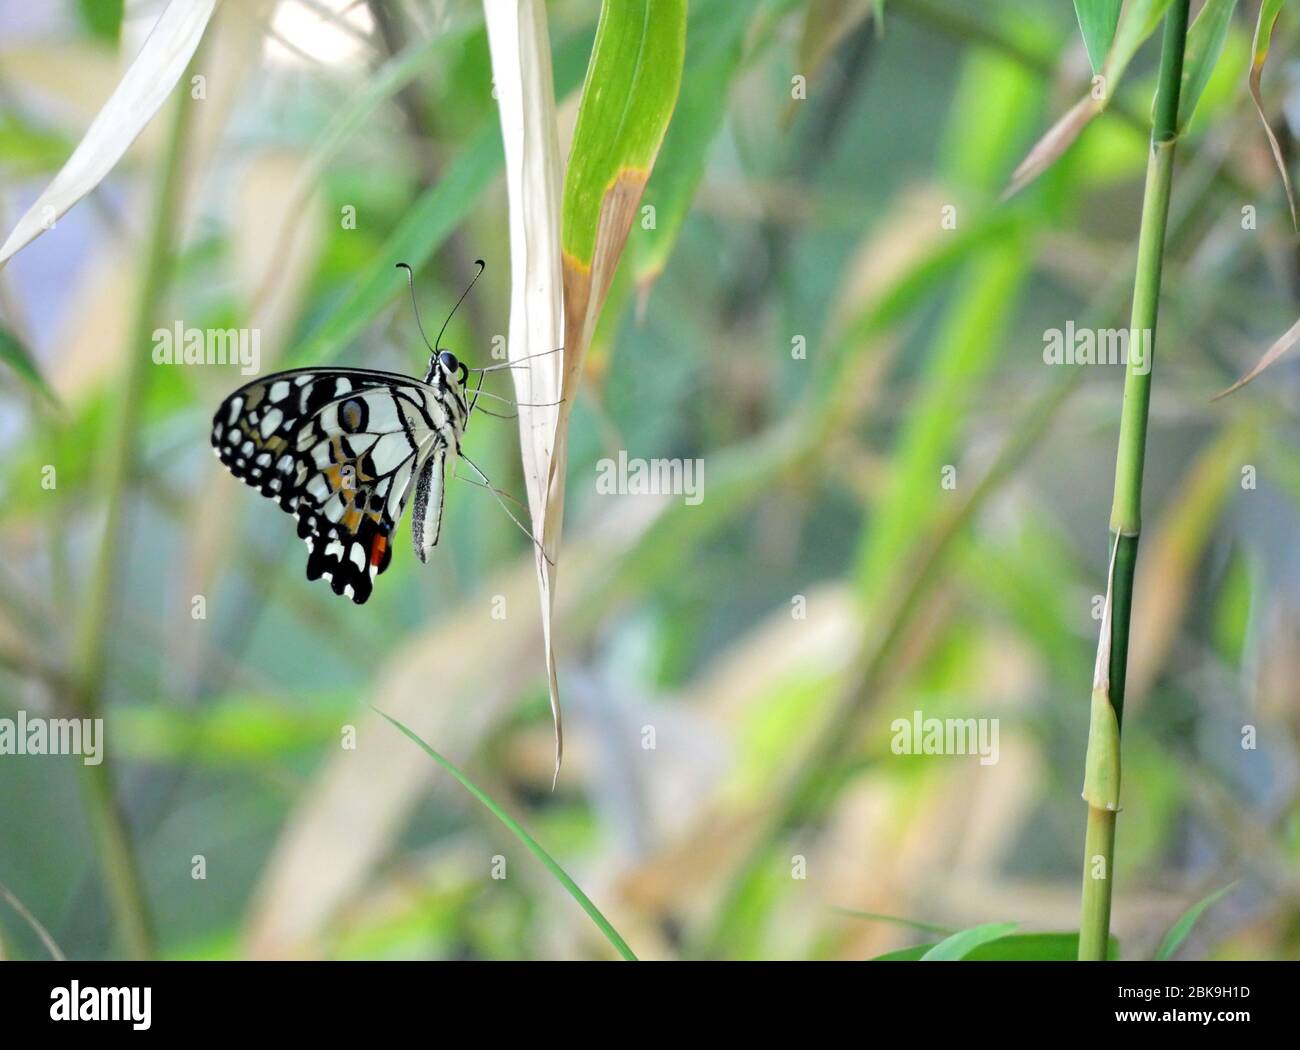 One beautiful lime butterfly, lemon butterfly, or chequered swallowtail (Papilio demoleus) on bamboo tree Stock Photo